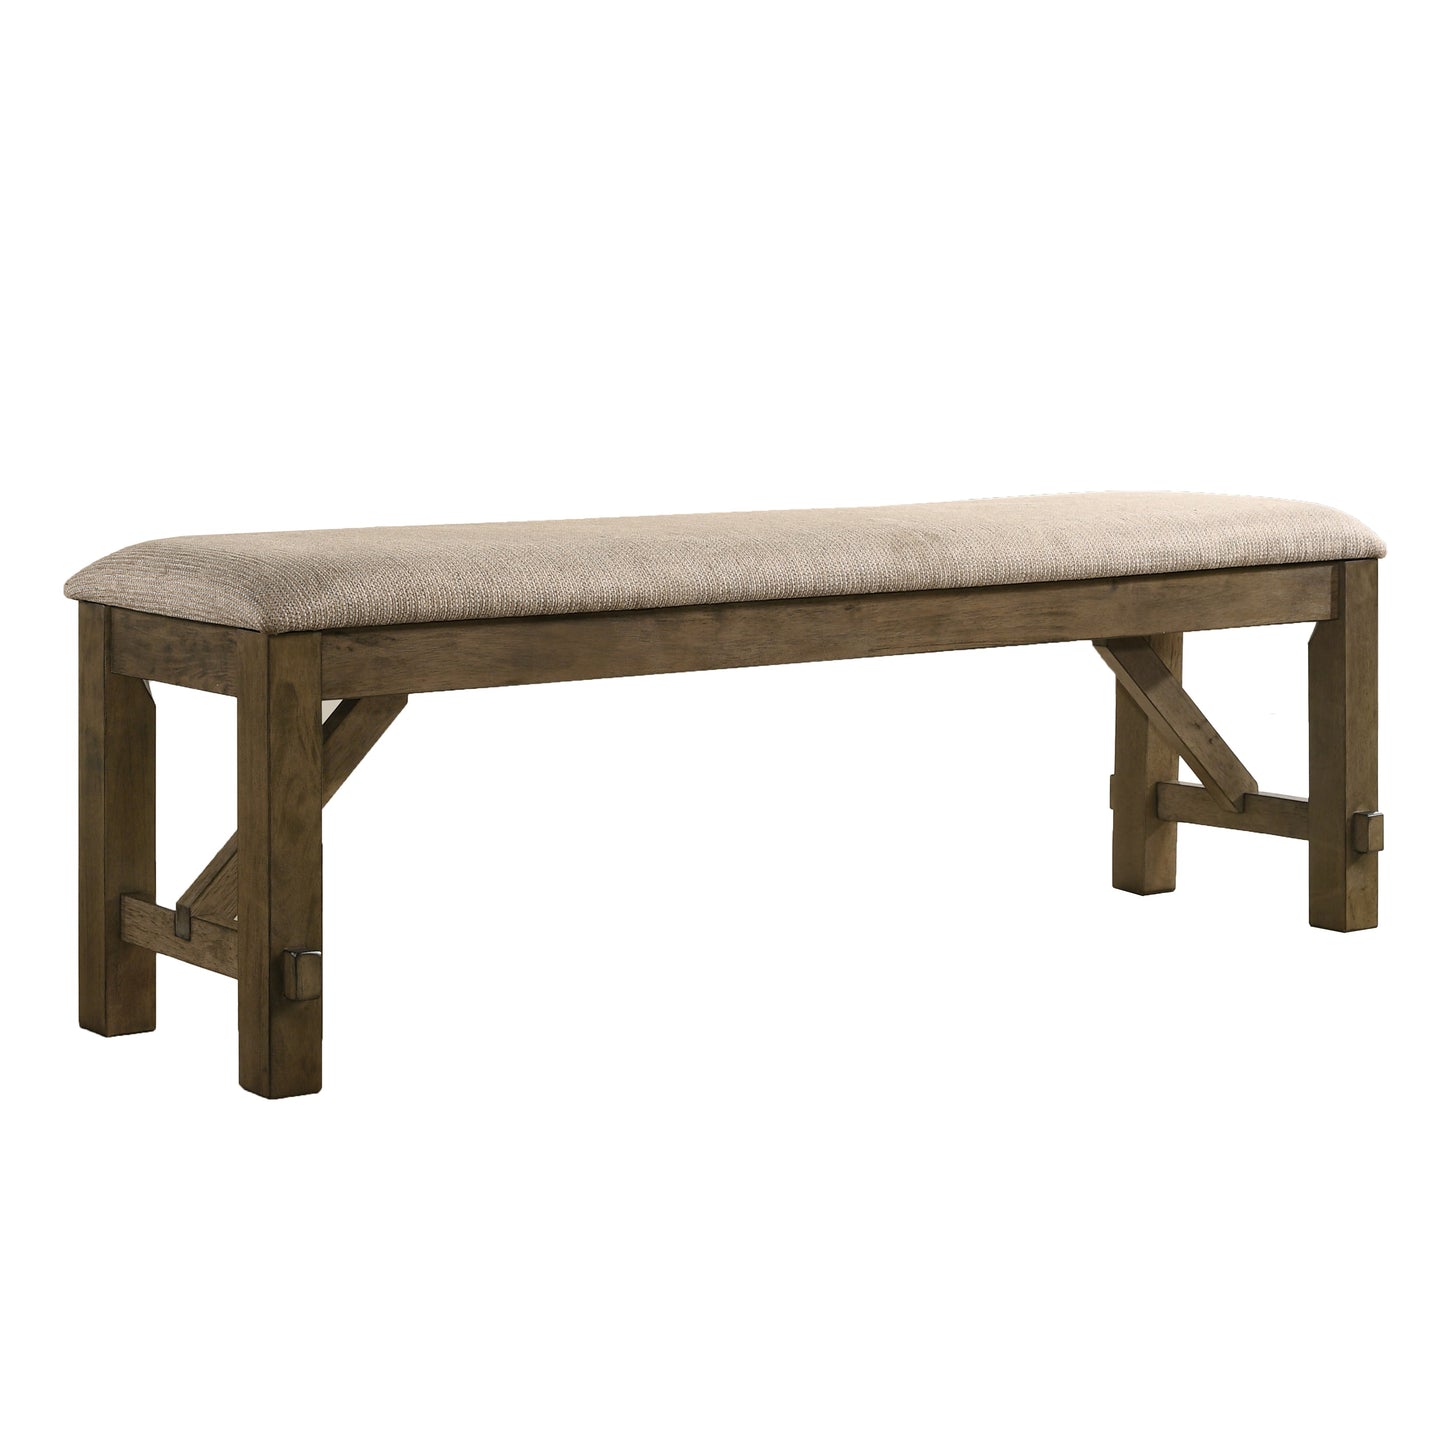 Raven Wood Fabric Upholstered Dining Bench